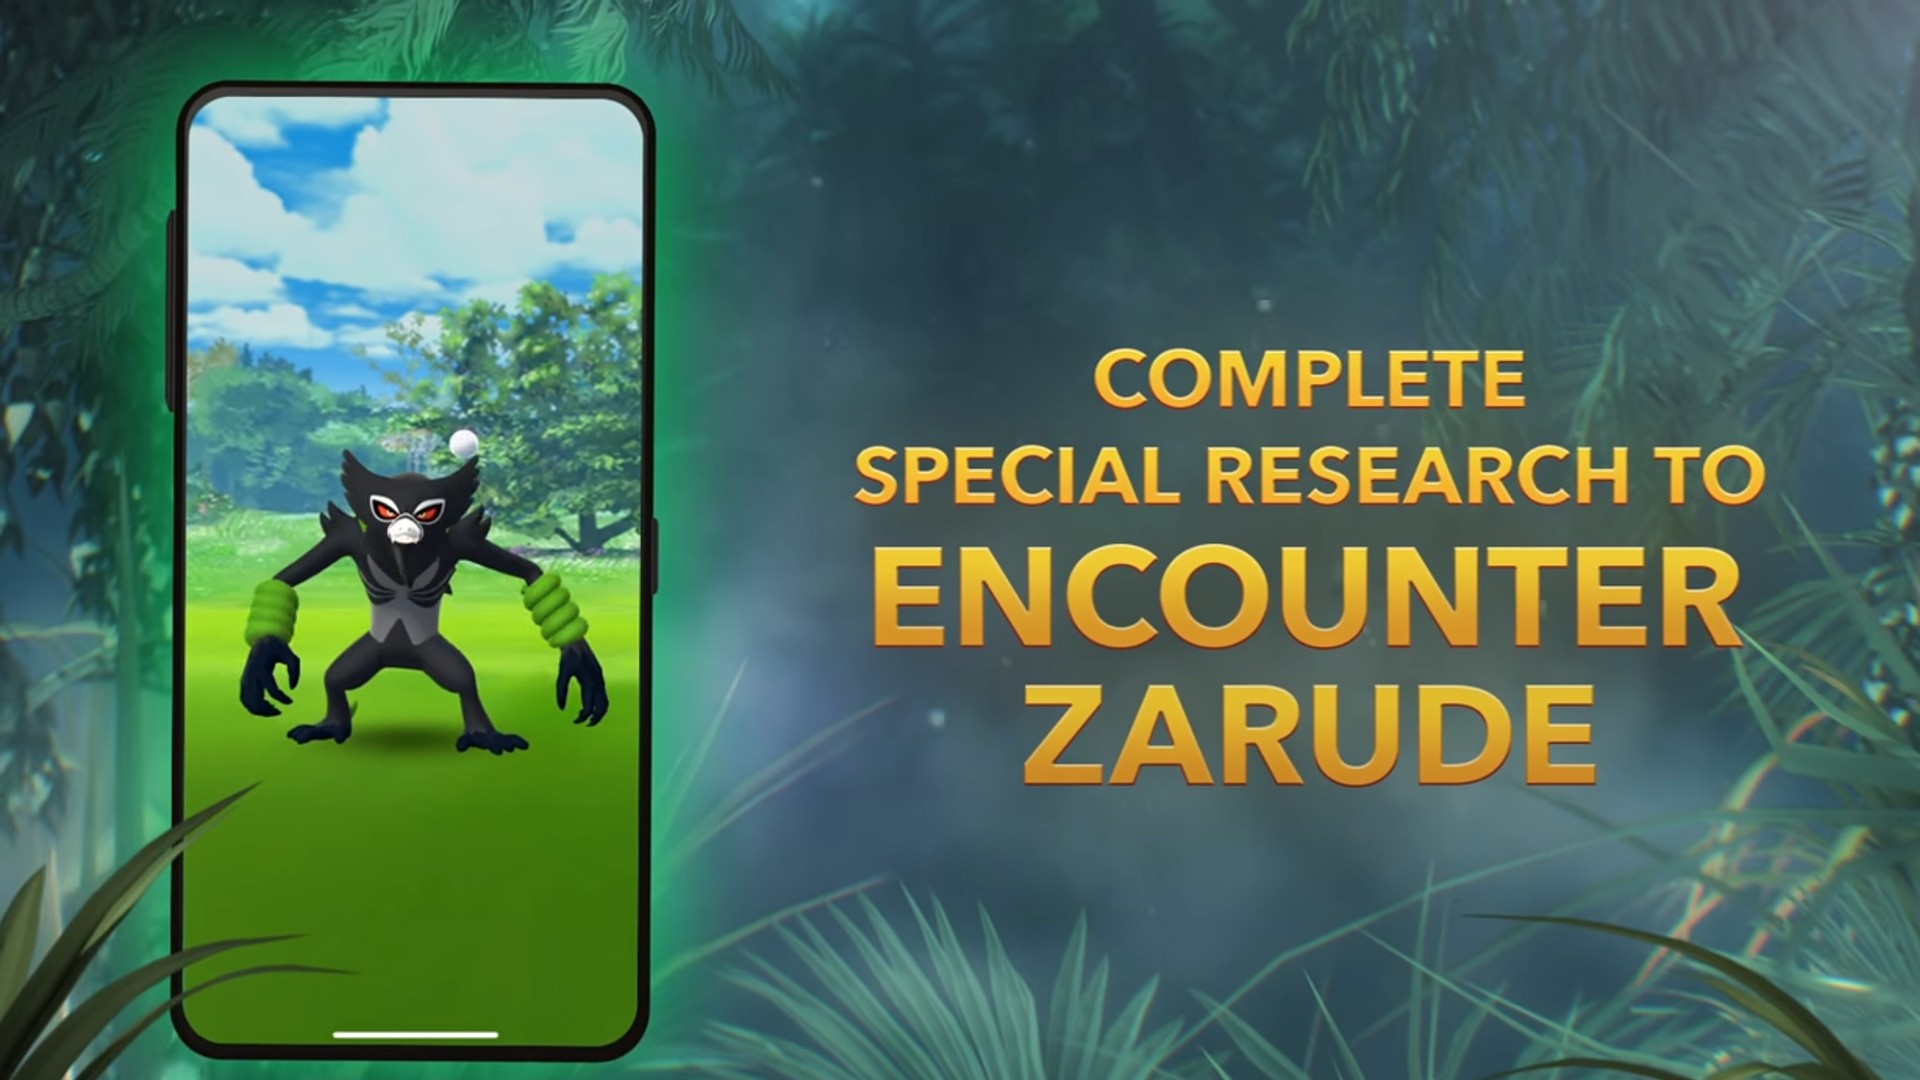 Zarude makes its first appearance in Pokémon Go